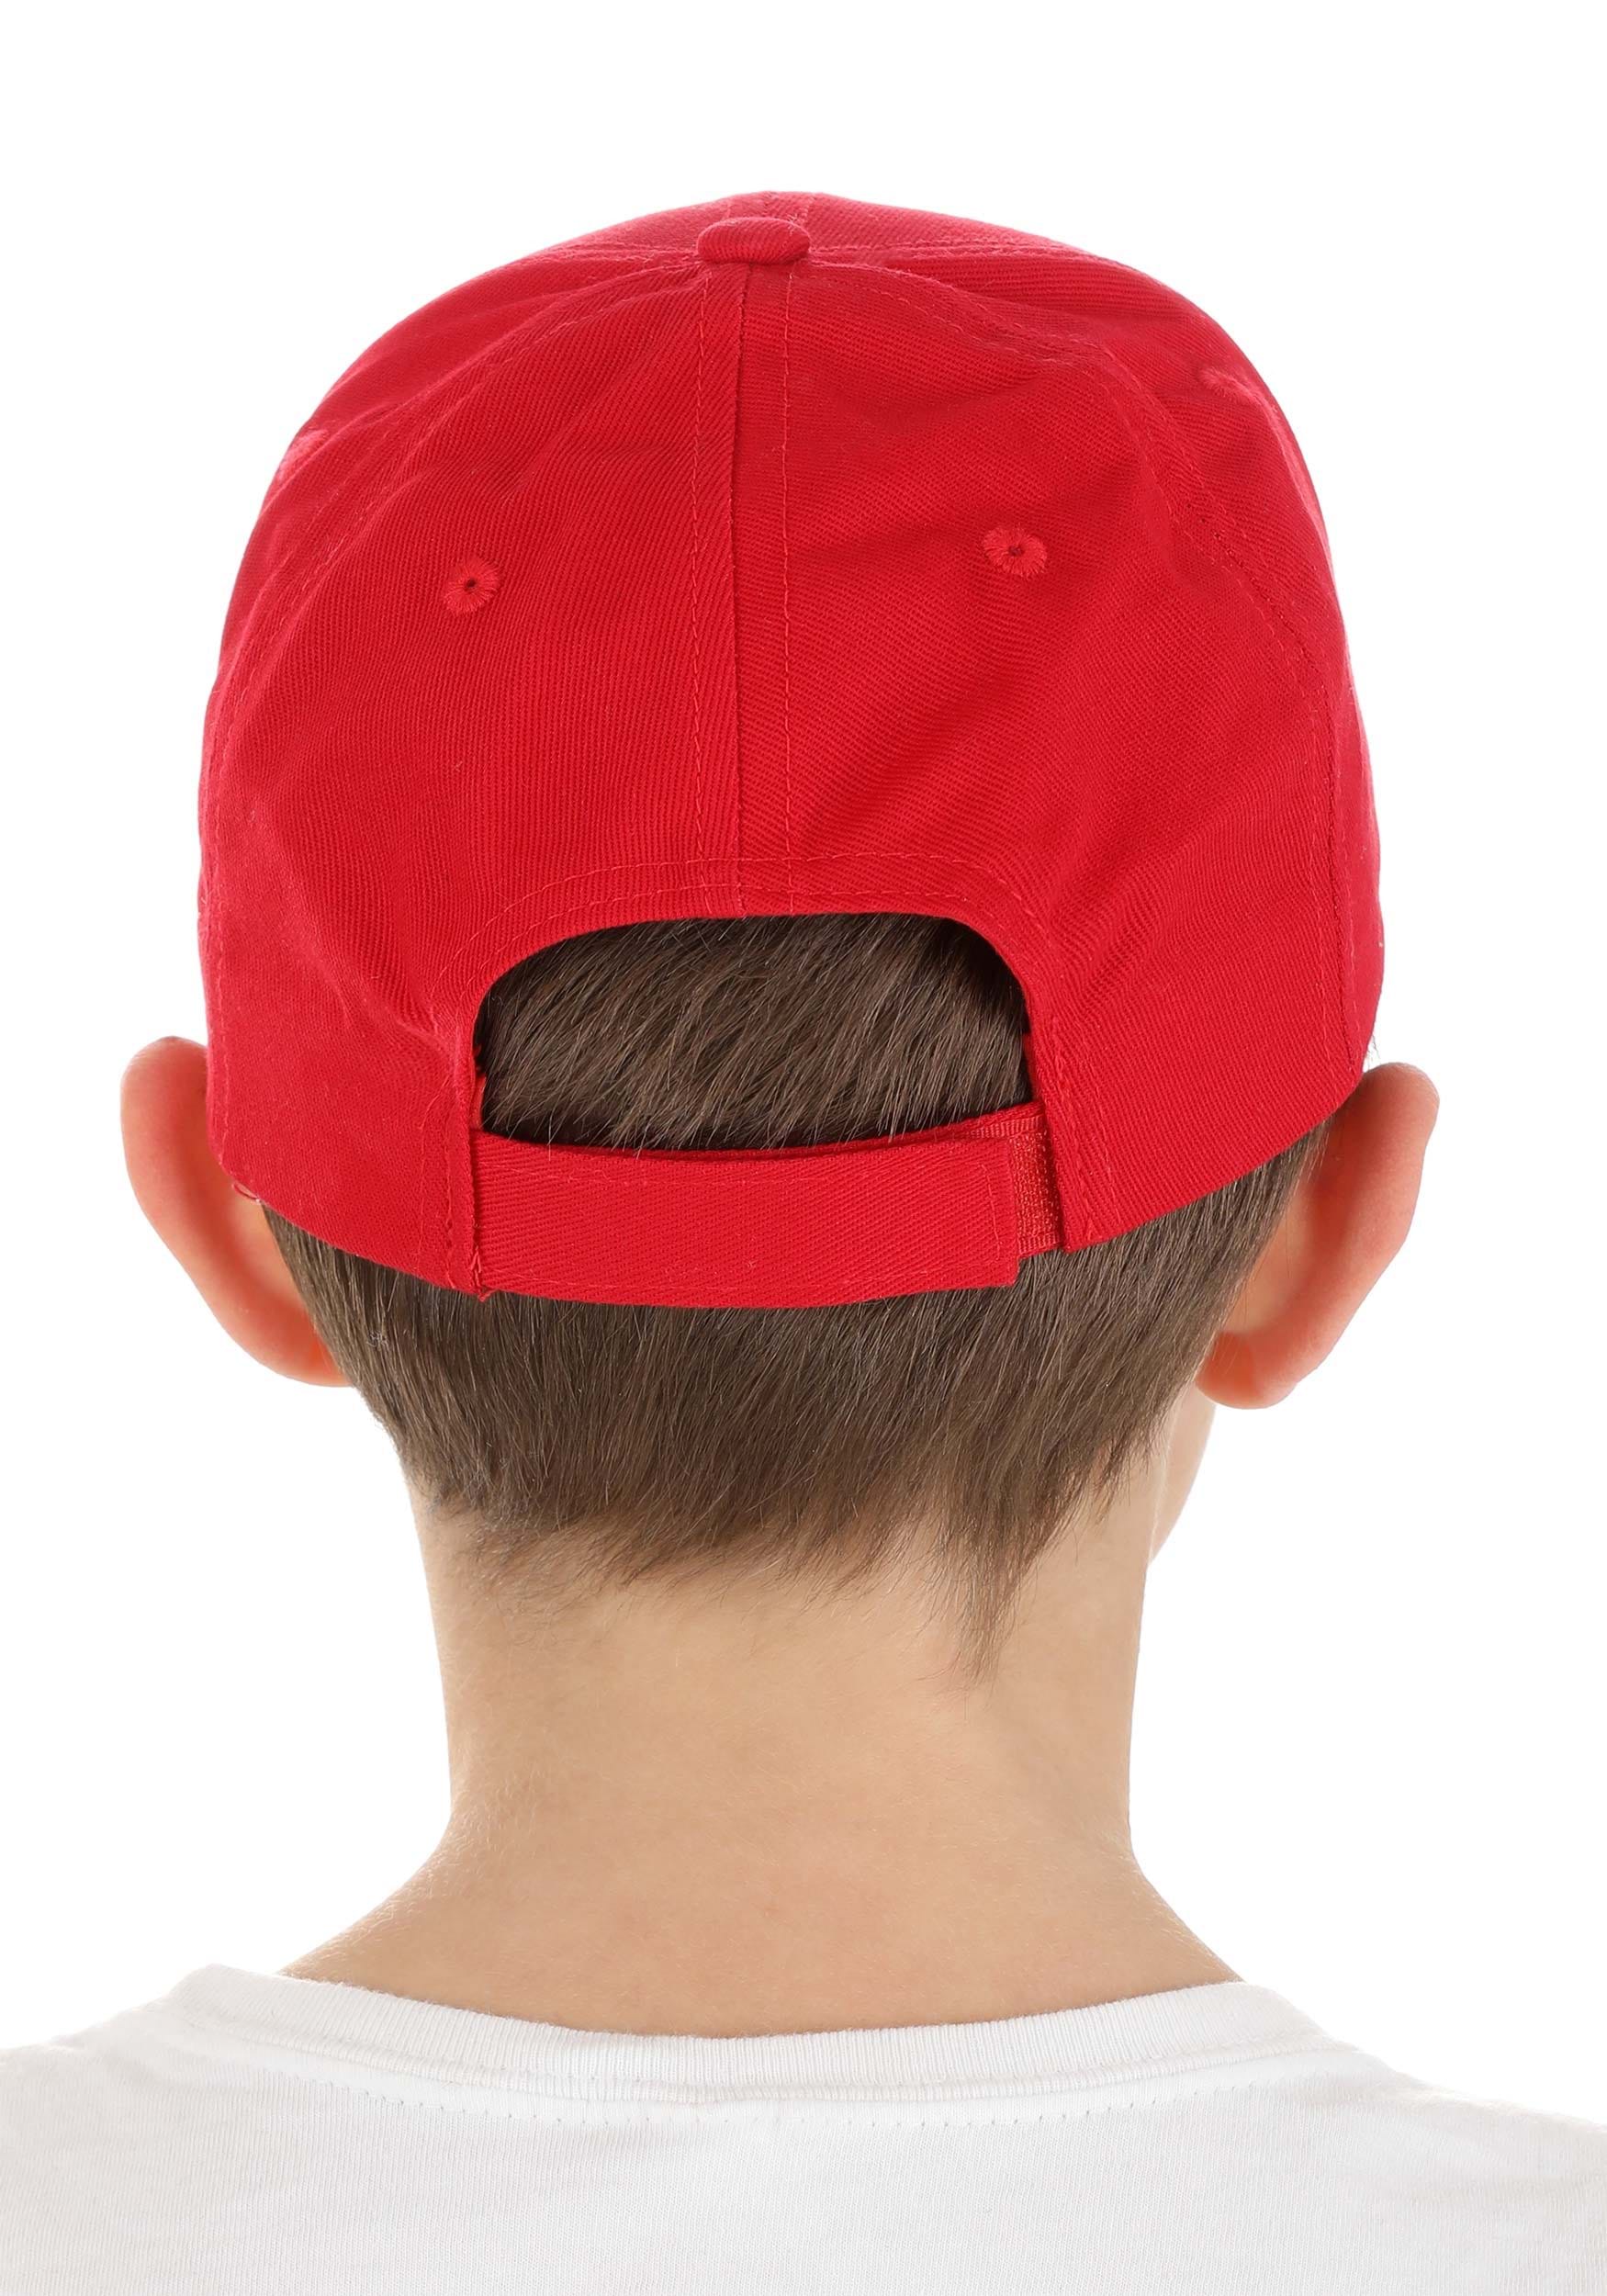 A League Of Their Own Baseball Hat For Kids